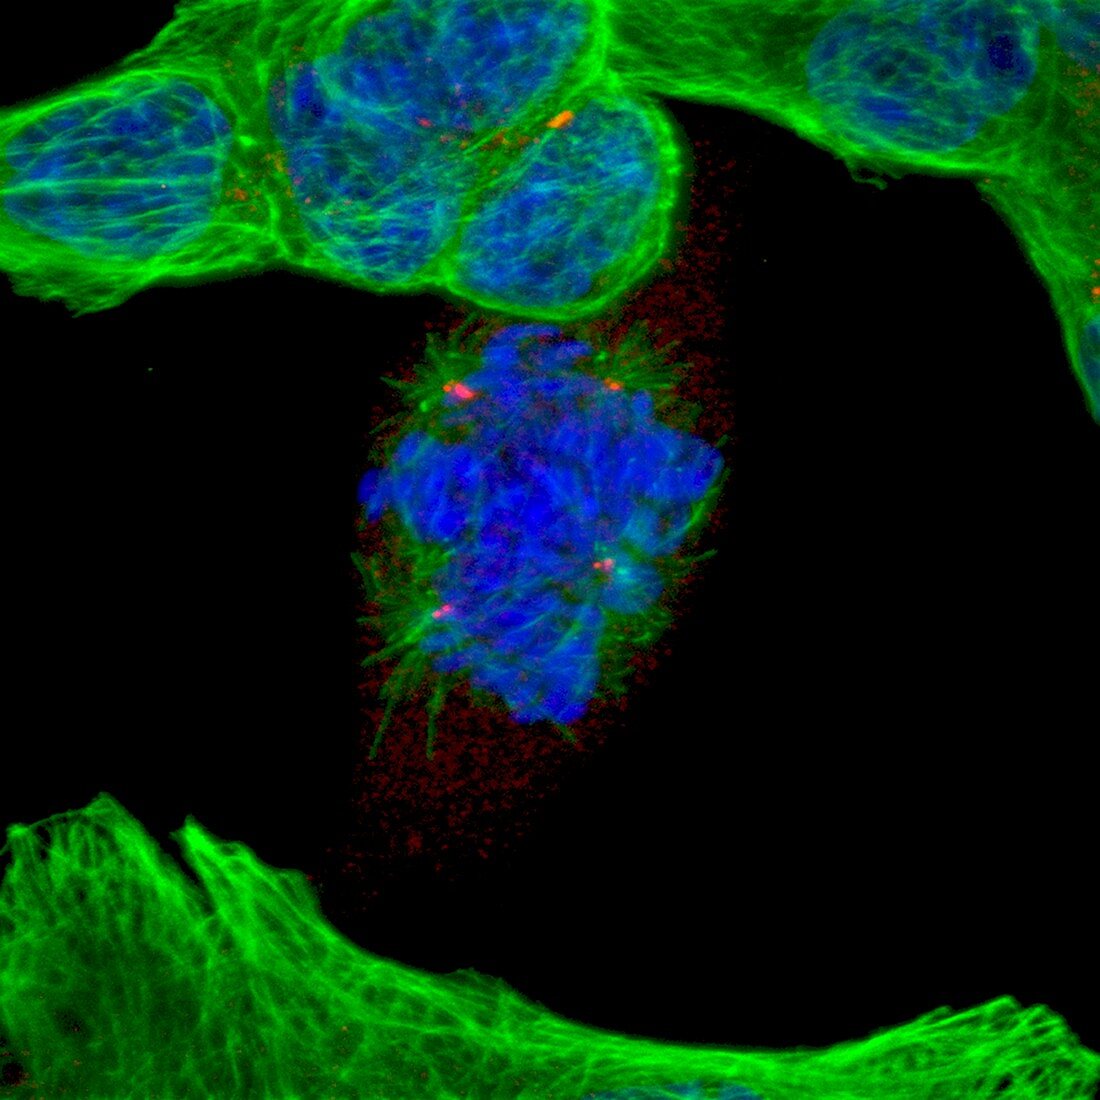 Aberrant mitosis, confocal light micrograph